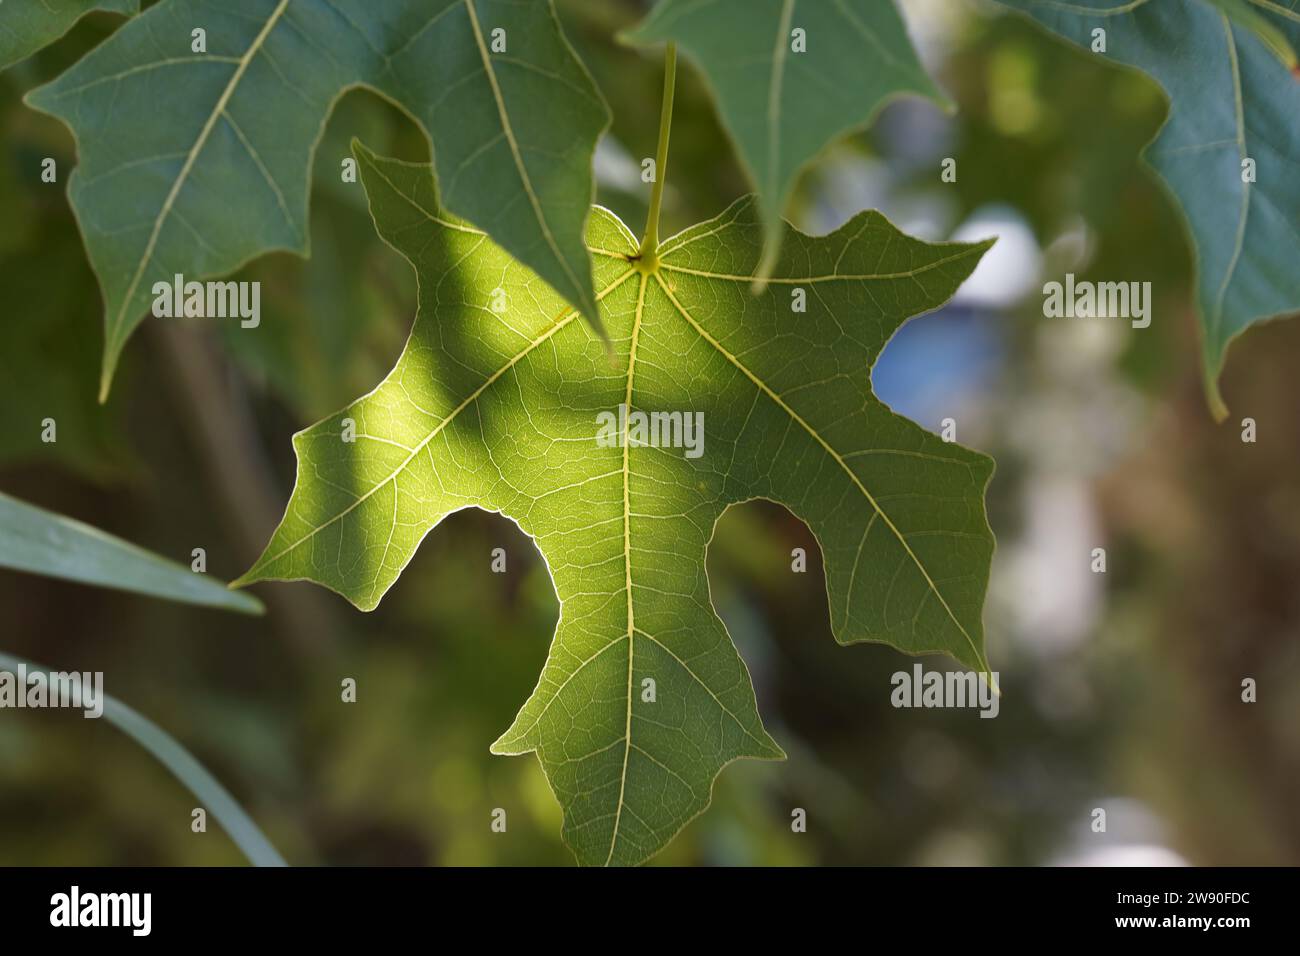 Leaves of Brachychiton australis commonly known as the broad-leaved bottle tree Stock Photo